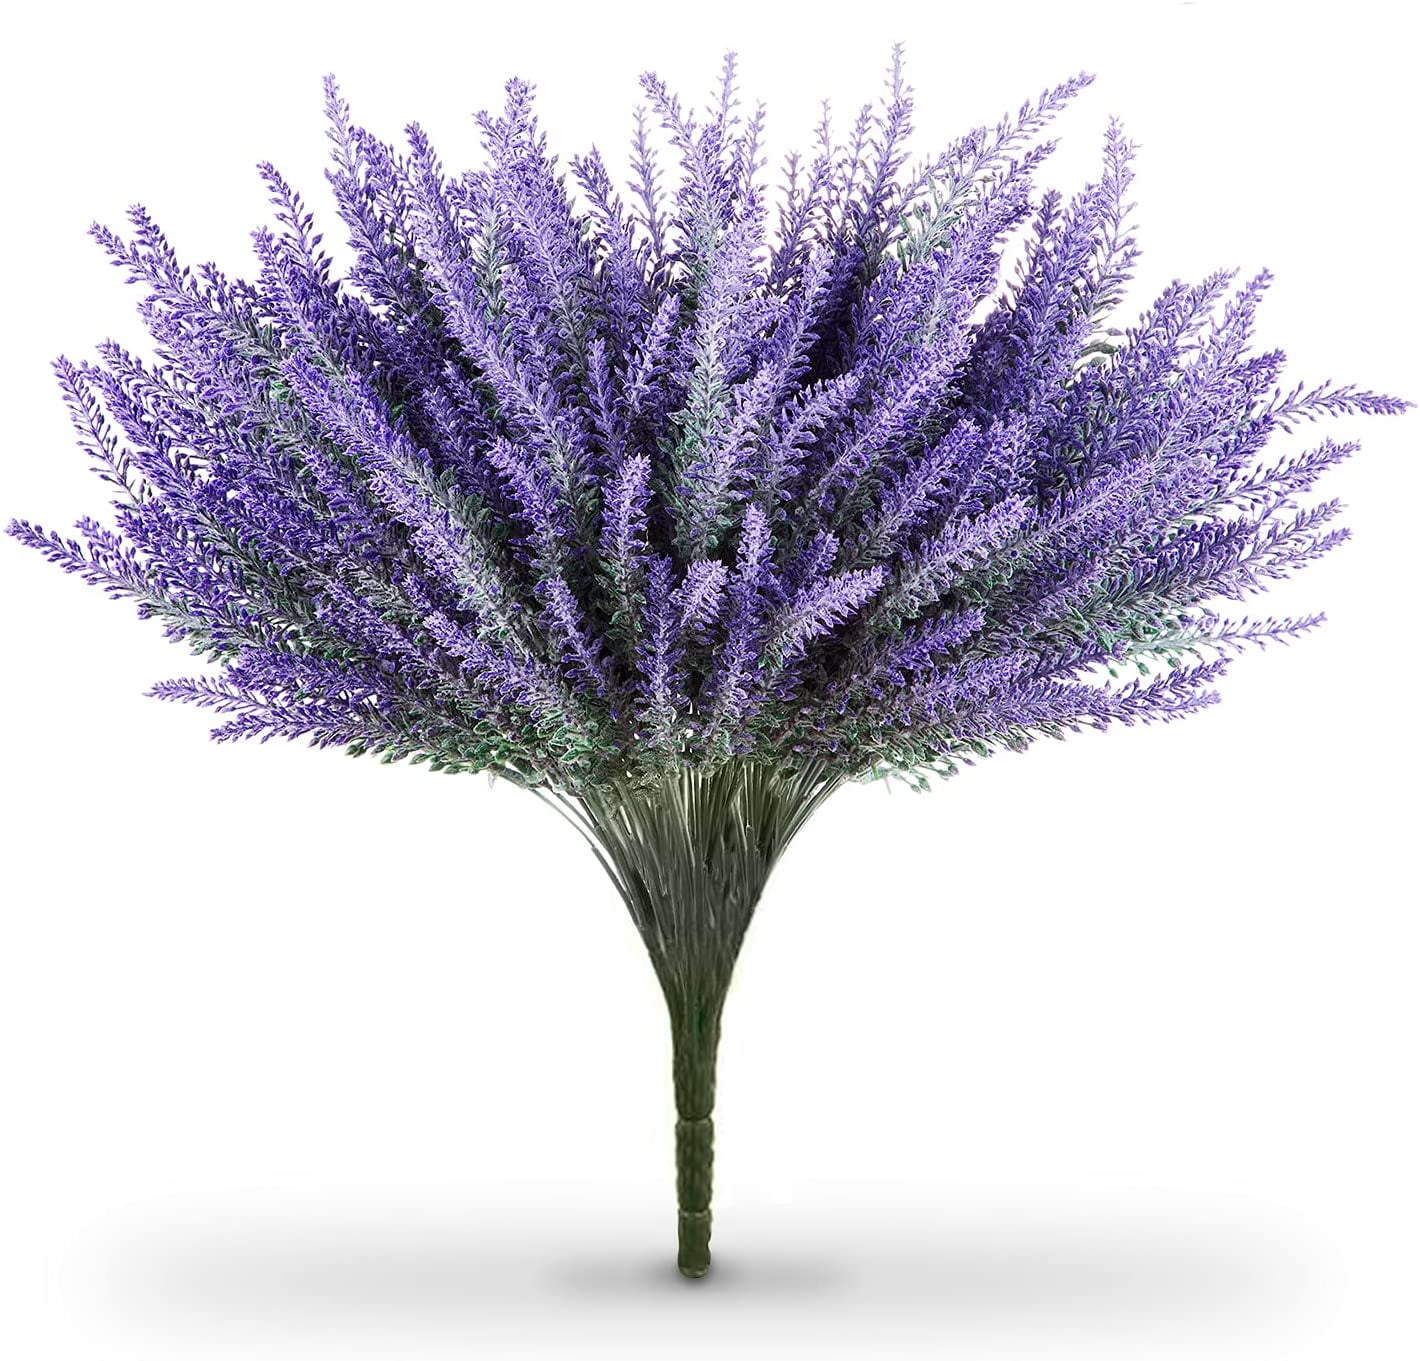 Butterfly Craze Artificial Lavender Plant with Silk Flowers for Wedding Decor and Table Centerpieces 8 Piece Bundle